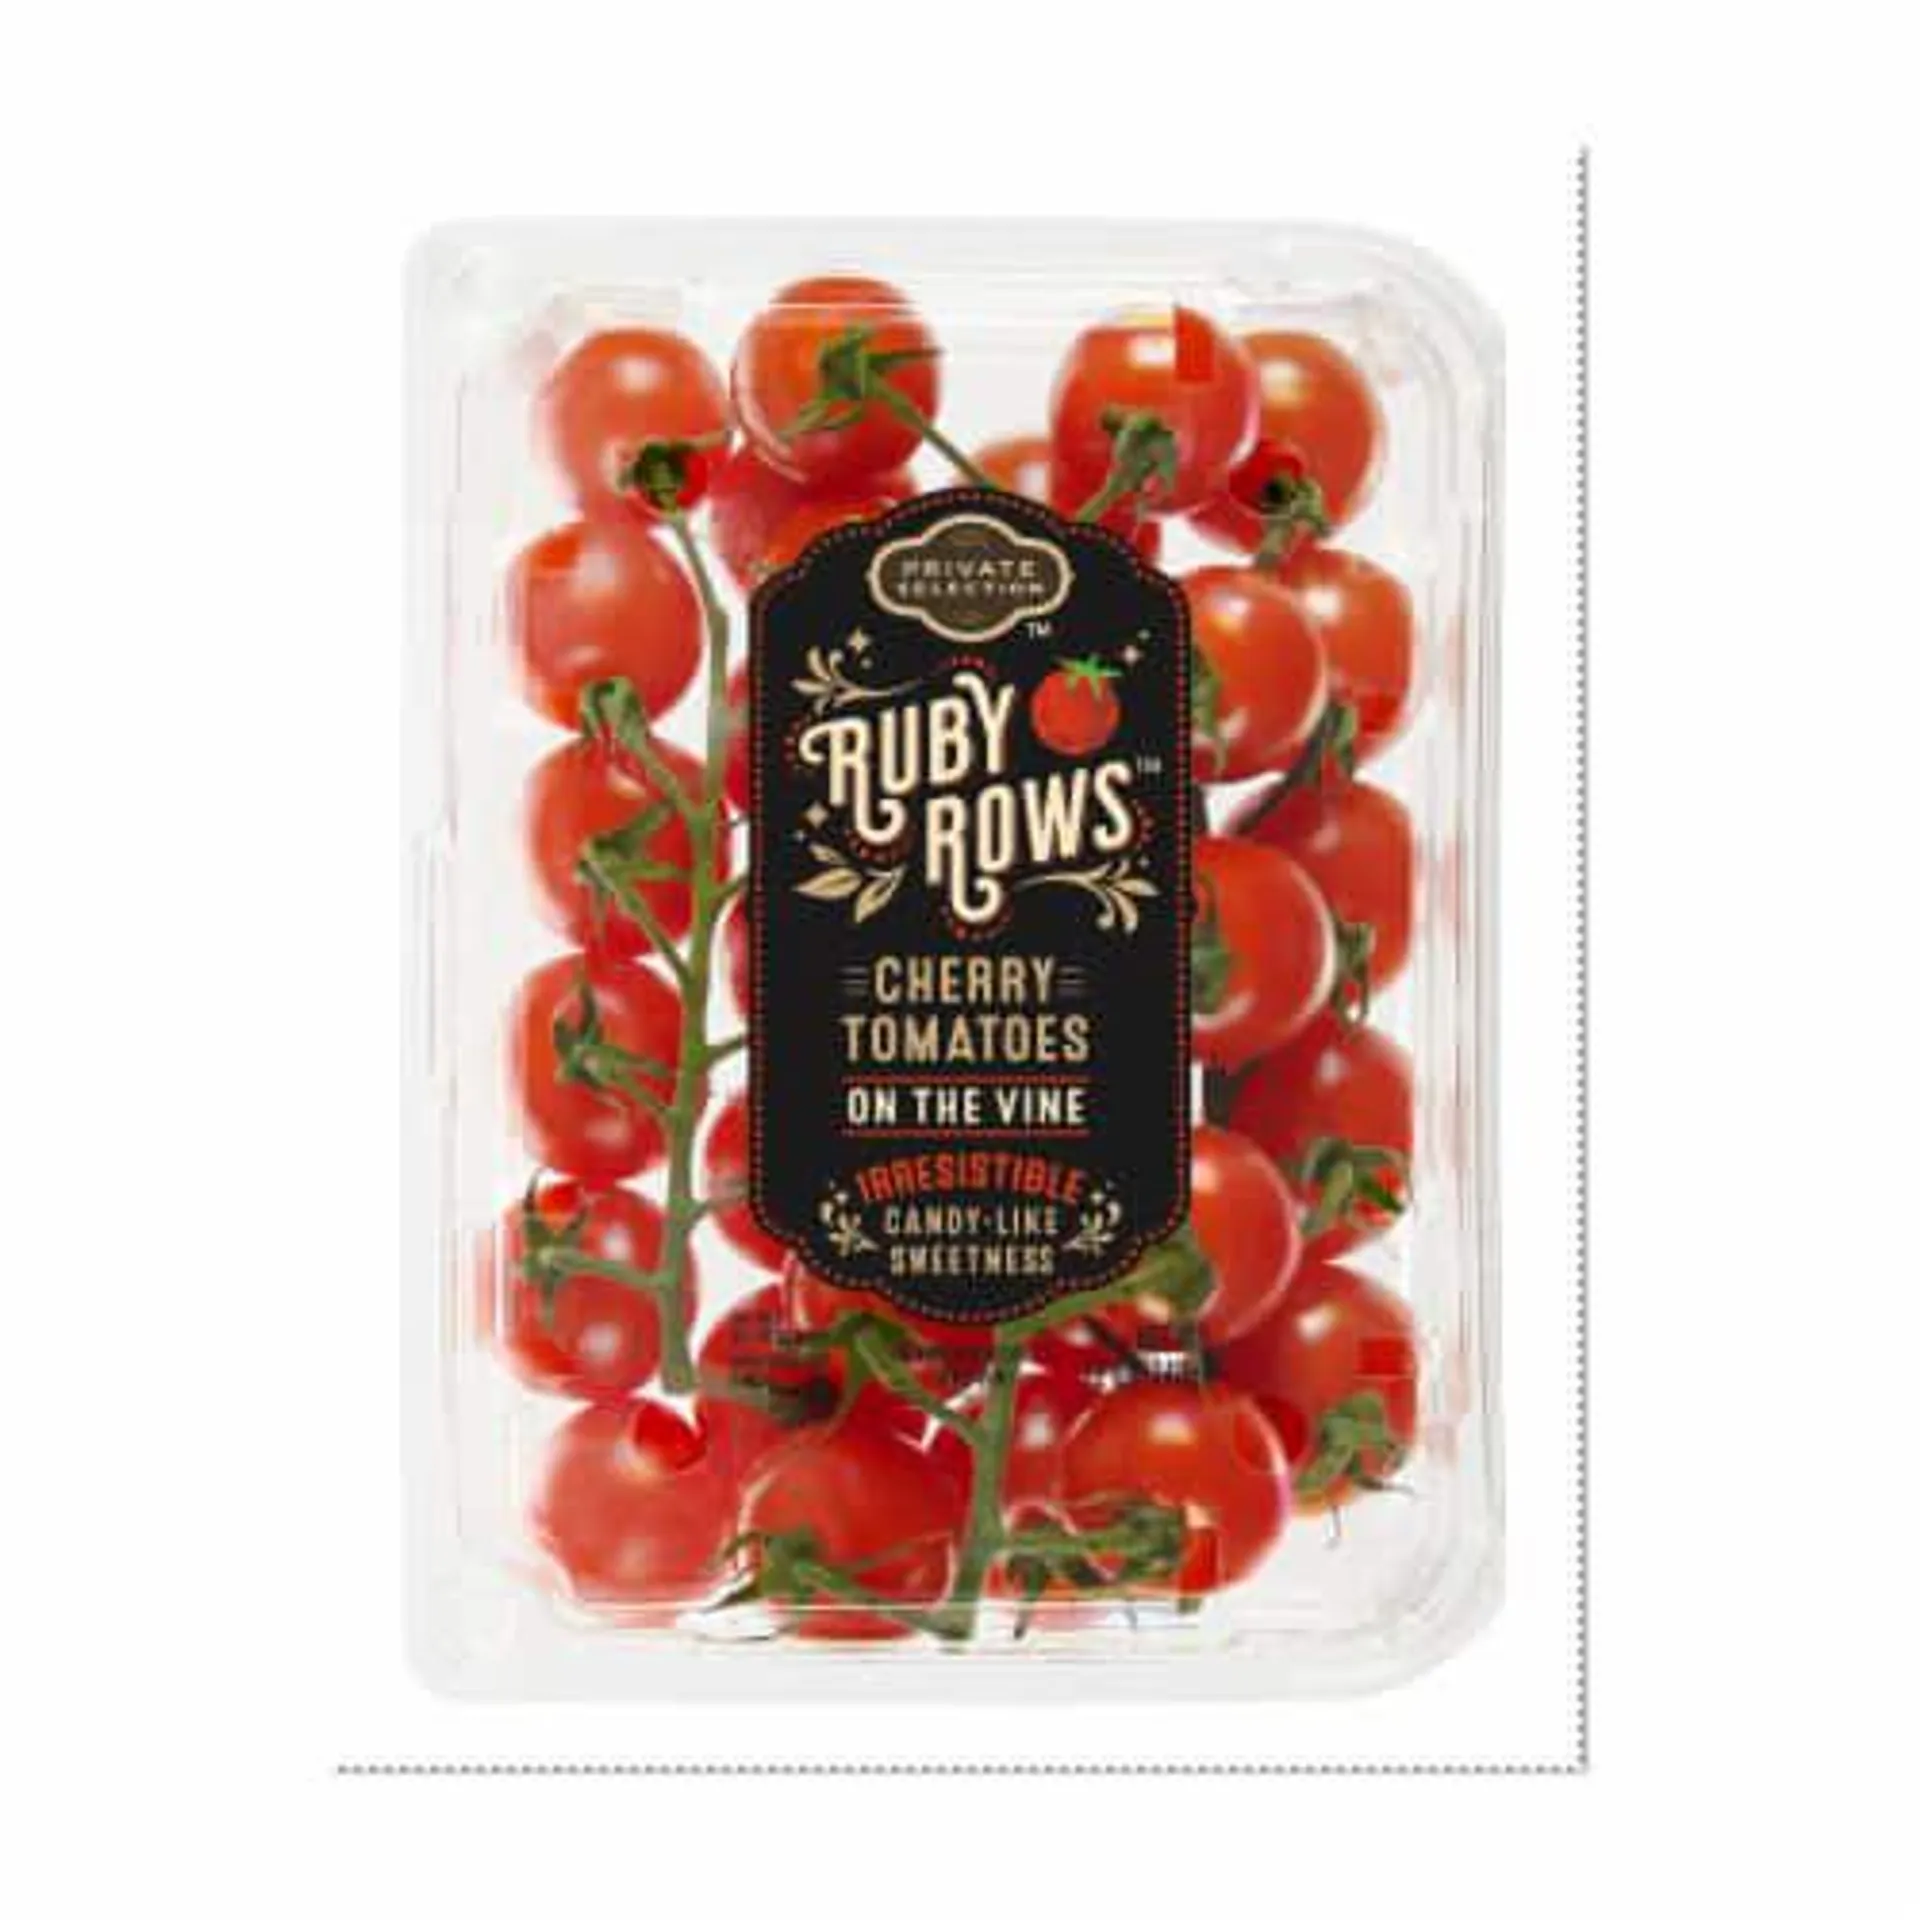 Private Selection™ Ruby Rows™ Cherry On-The-Vine Tomatoes